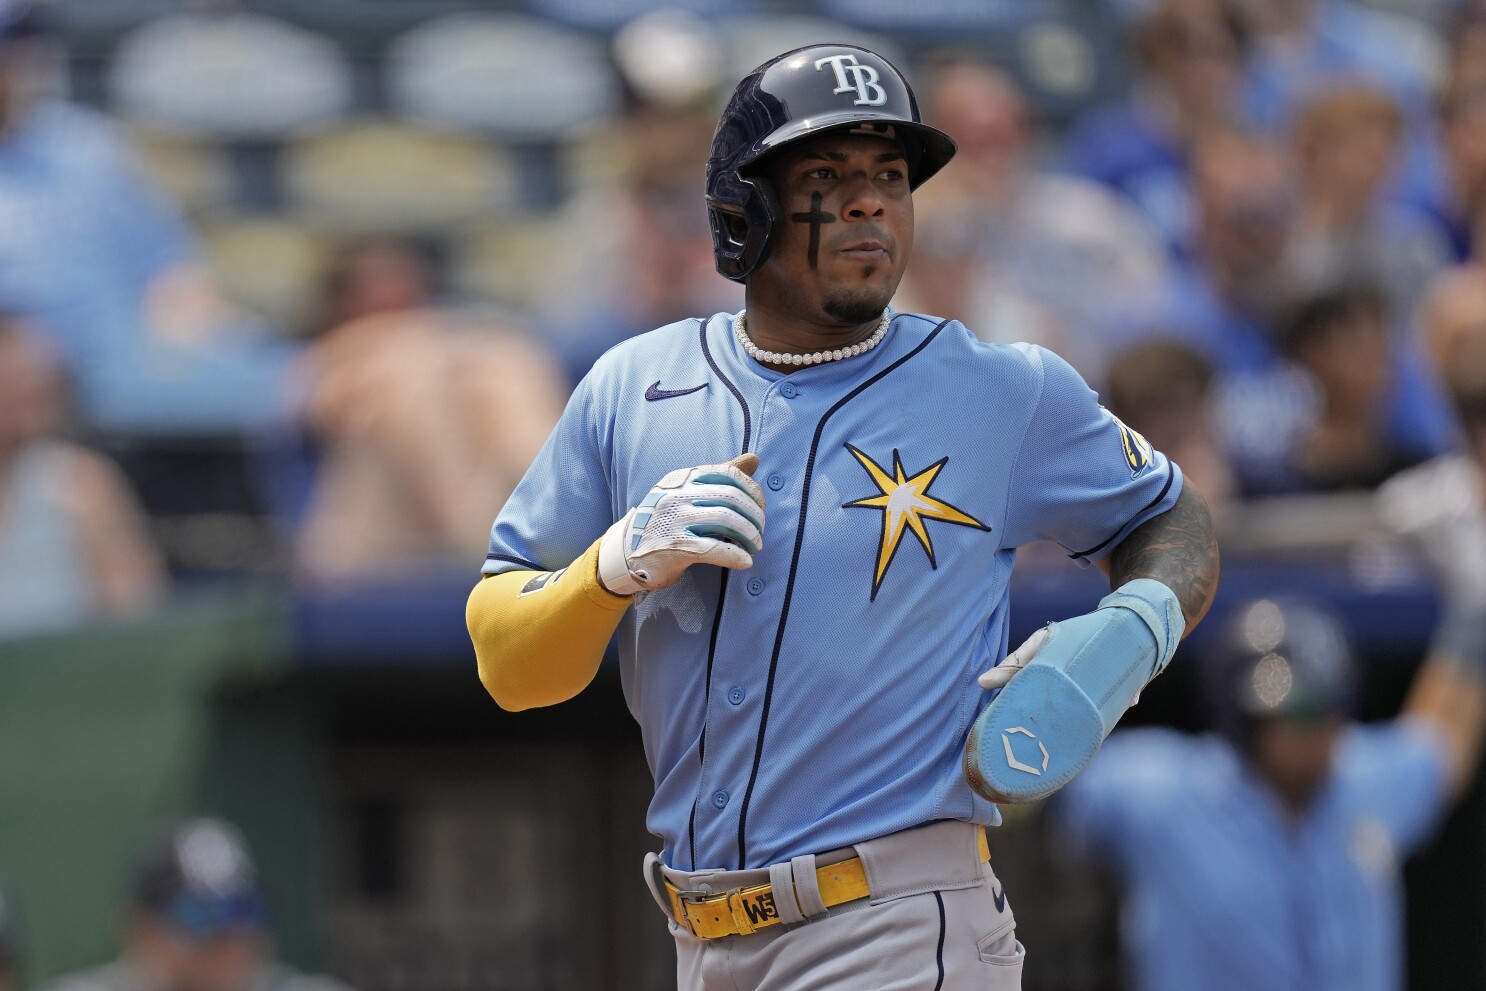 Wander Franco investigations continue as Rays prepare for the